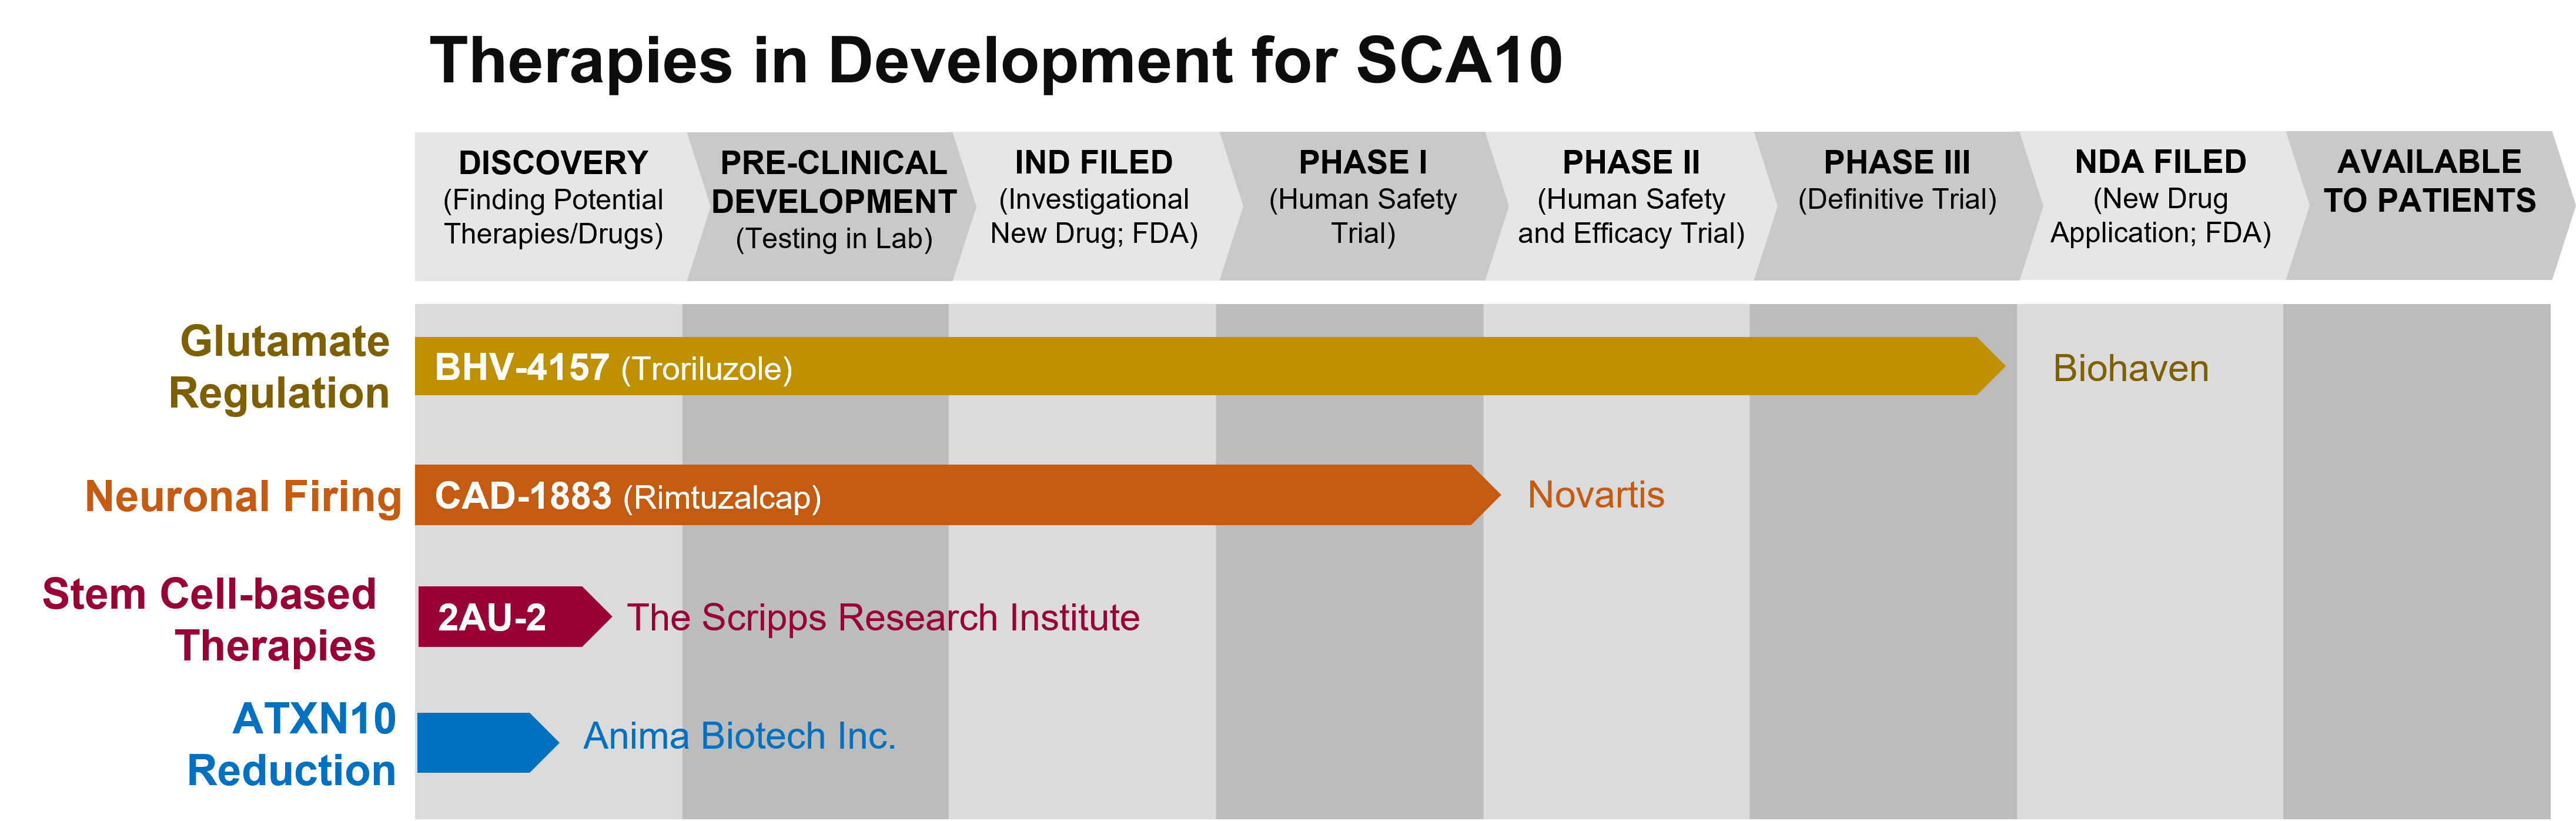 Graph depicting the phase of drug development for various drugs to treat SCA10